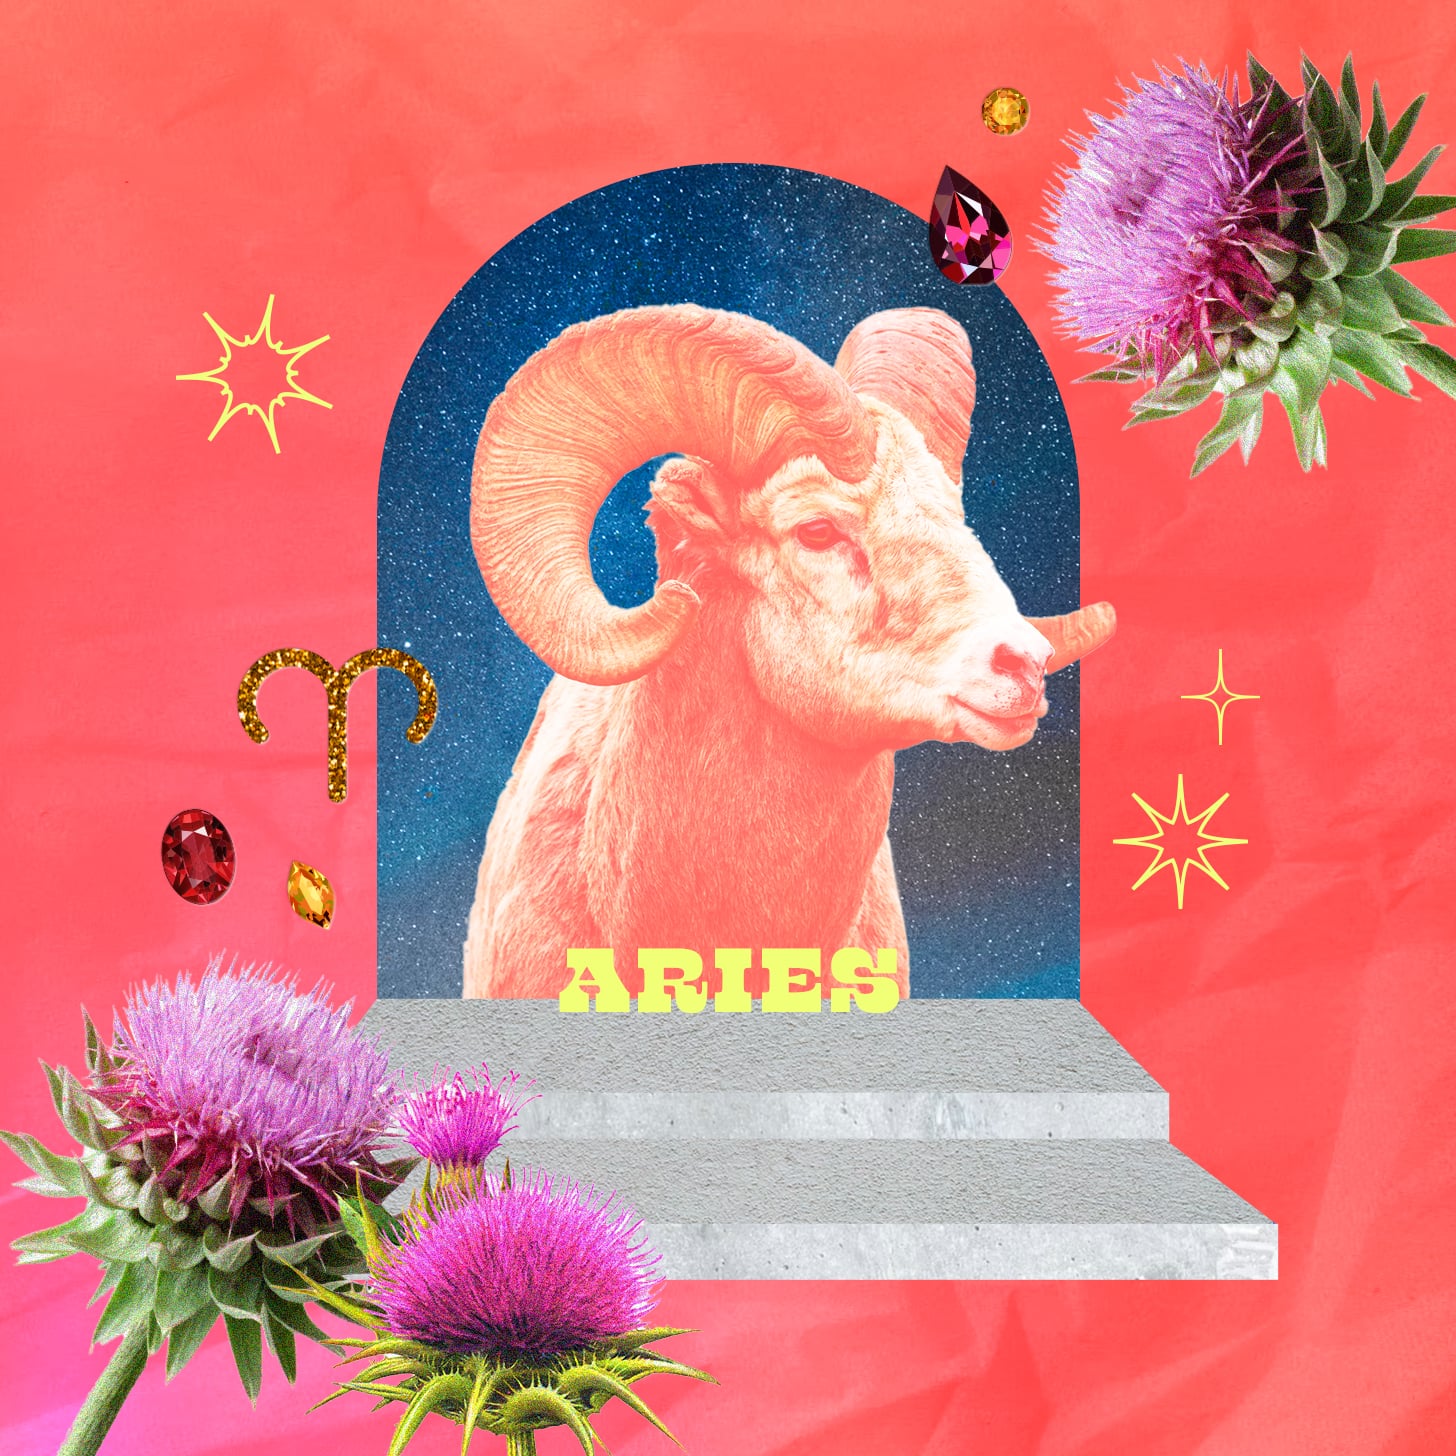 Aries weekly horoscope for December 18, 2022 